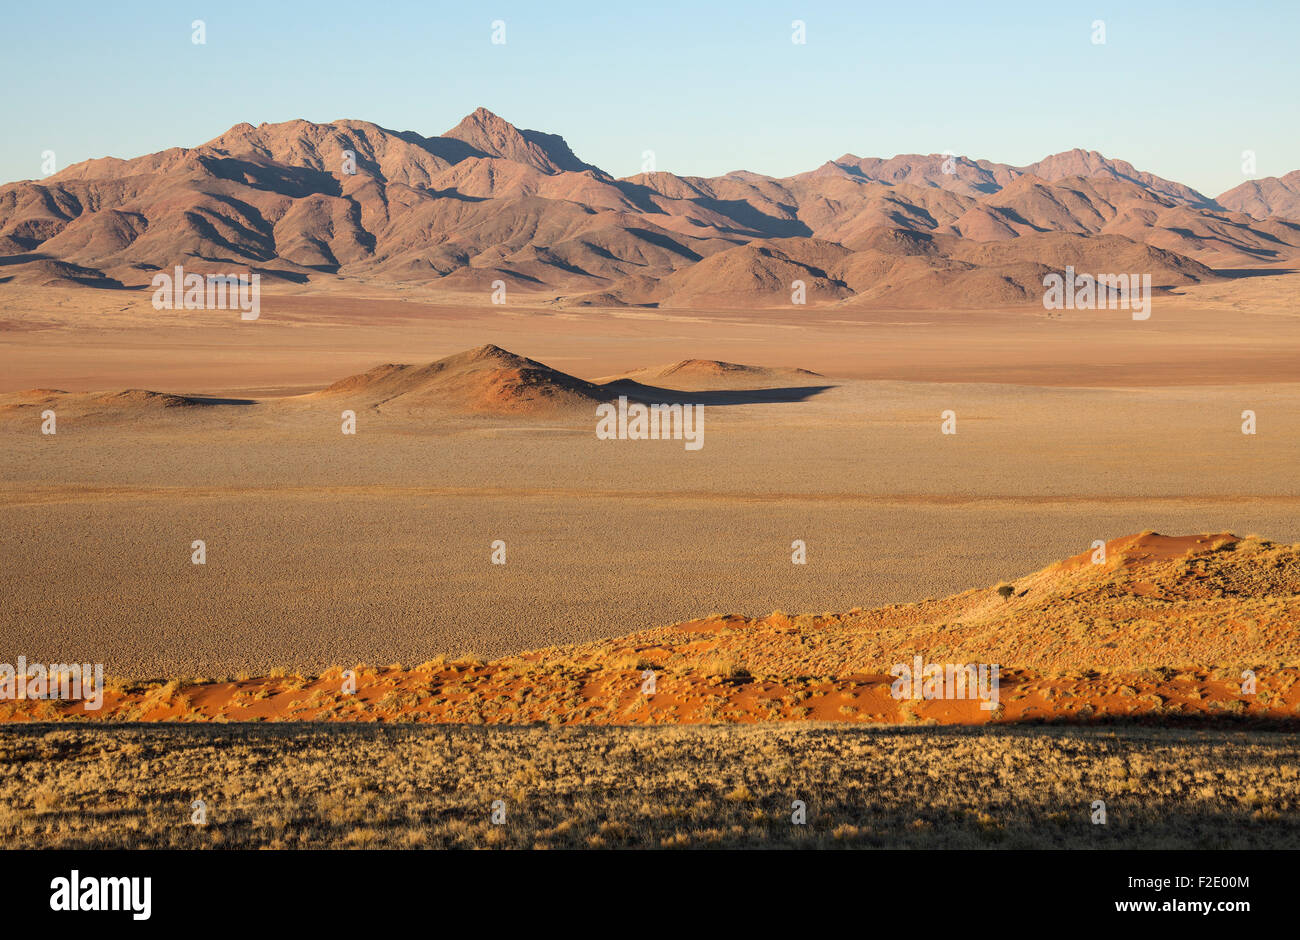 Sand dunes covered with bushman grass (Stipagrostis sp.), arid desert plains and isolated mountain ridges at the edge of the Stock Photo